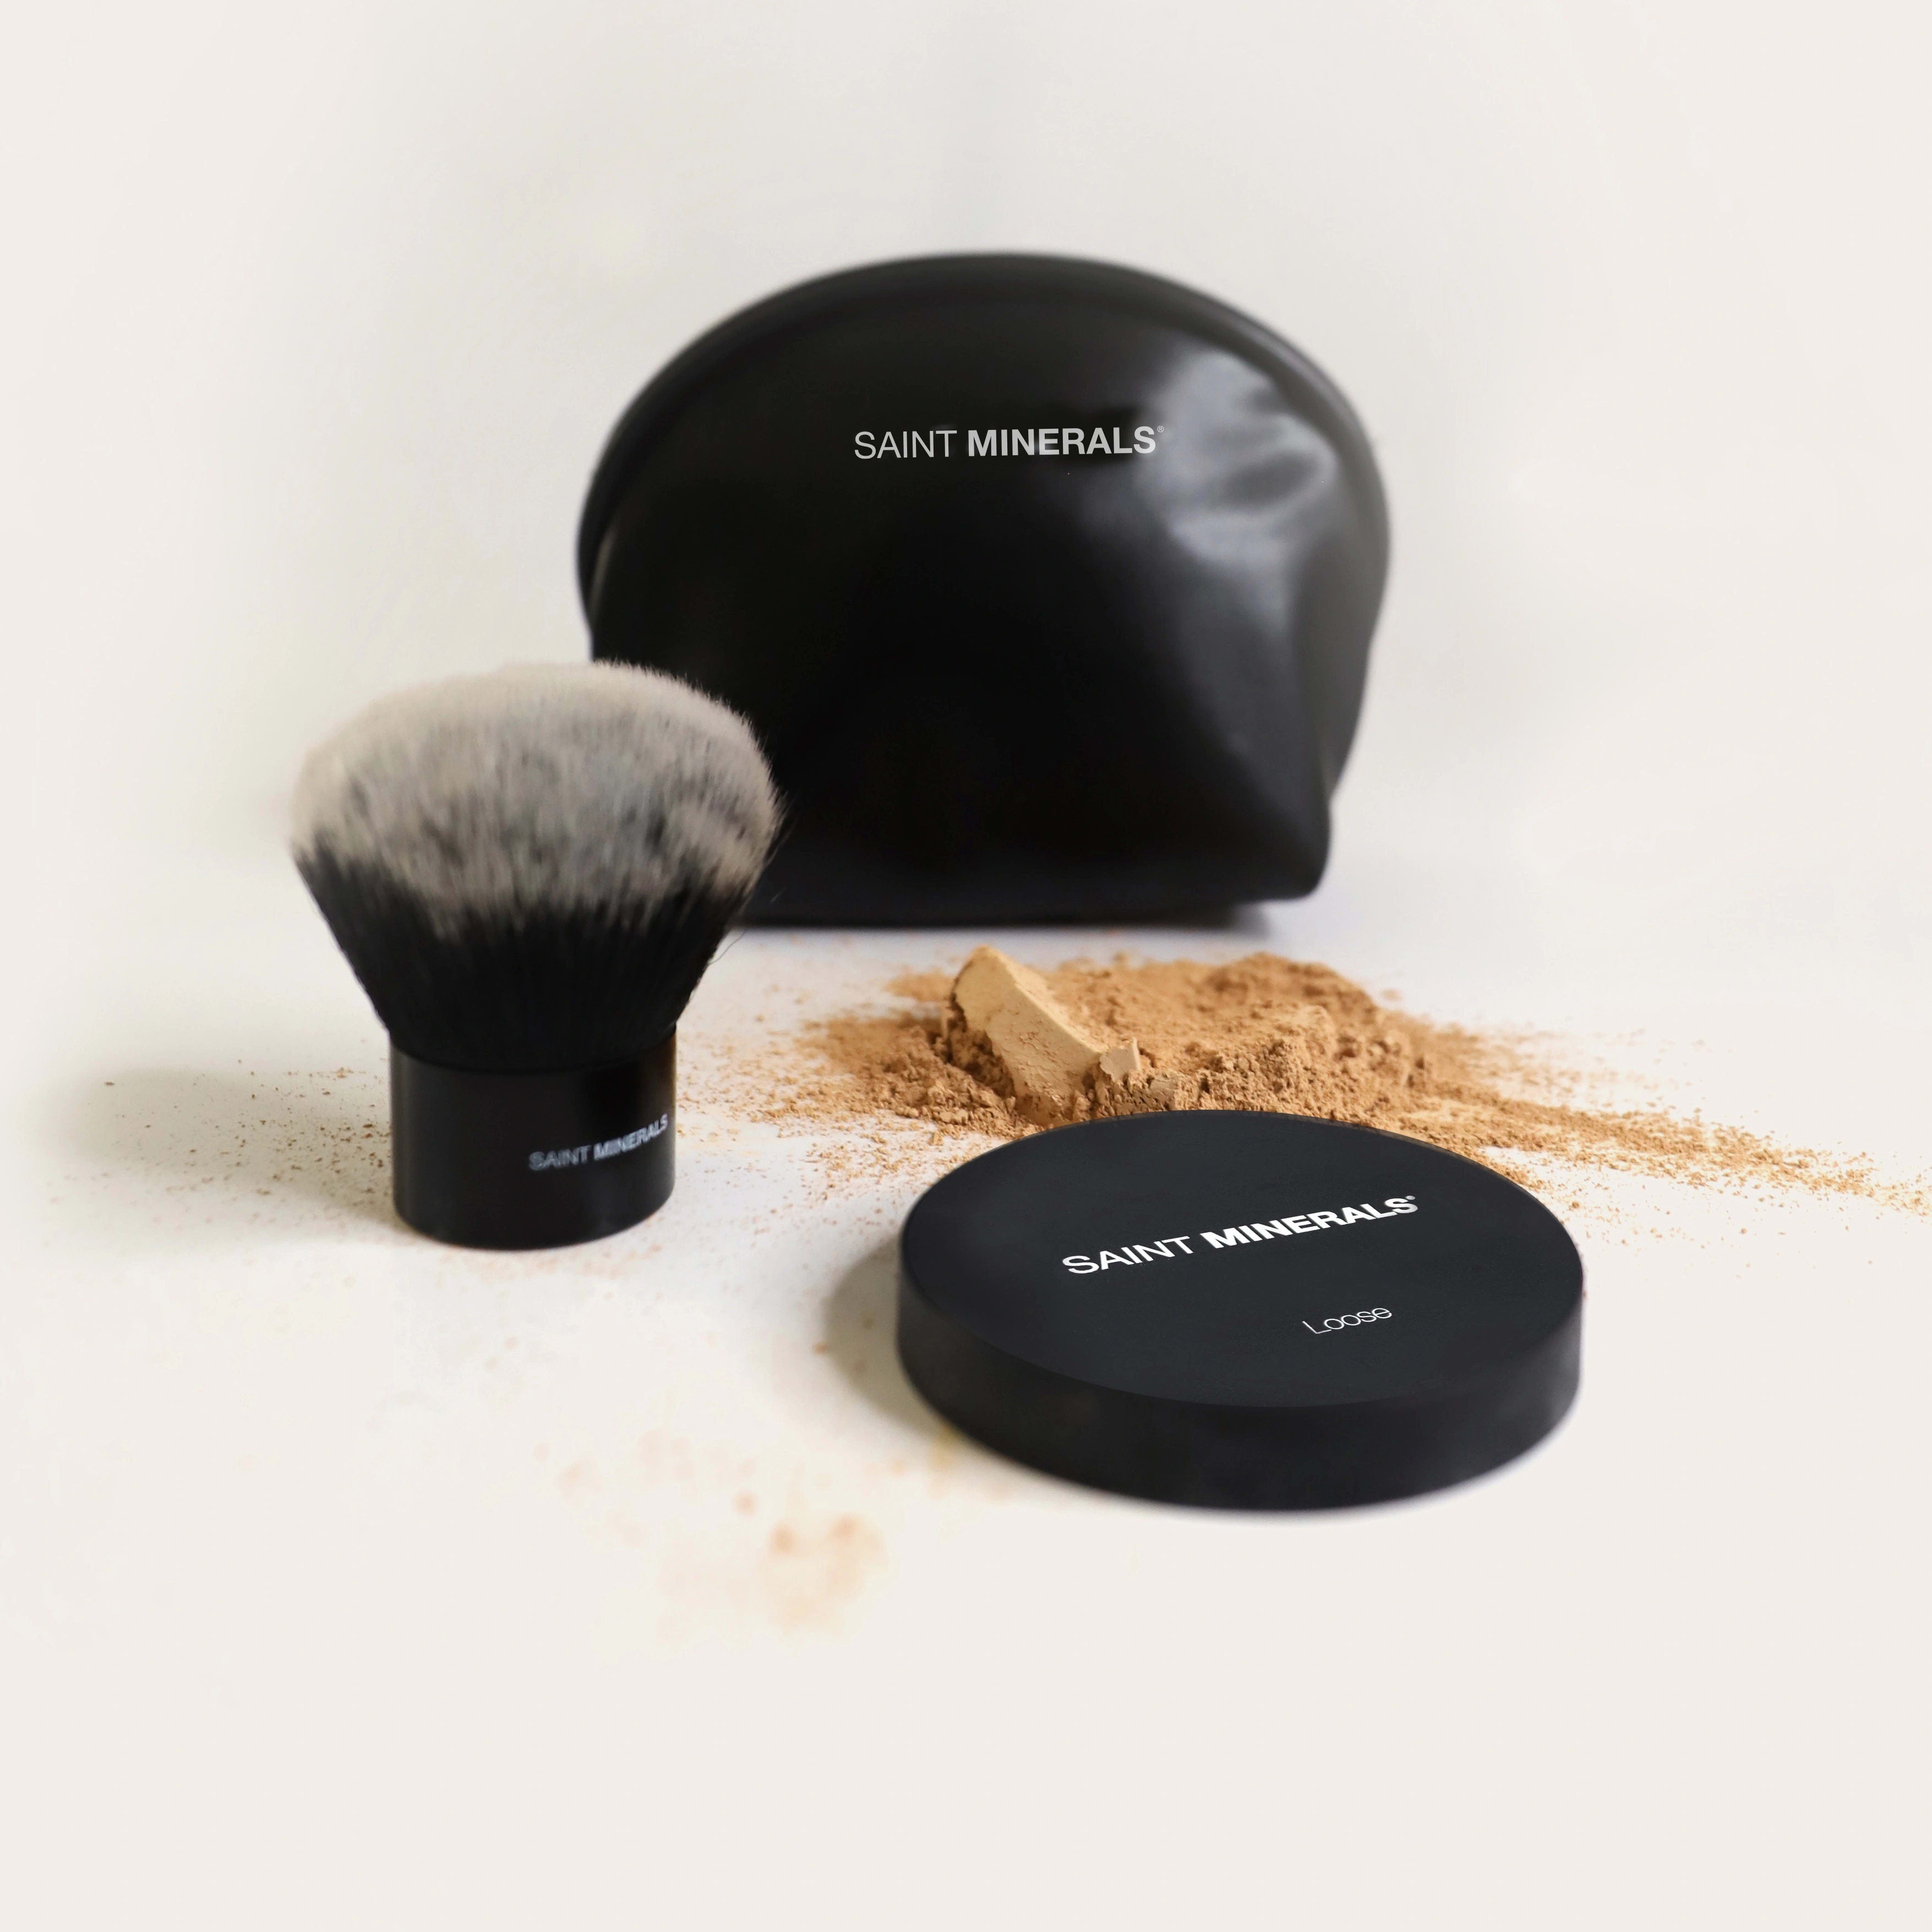 Saint Minerals Makeup BFF Pack Limited Edition (Loose Powder #3) - Exquisite Laser Clinic 